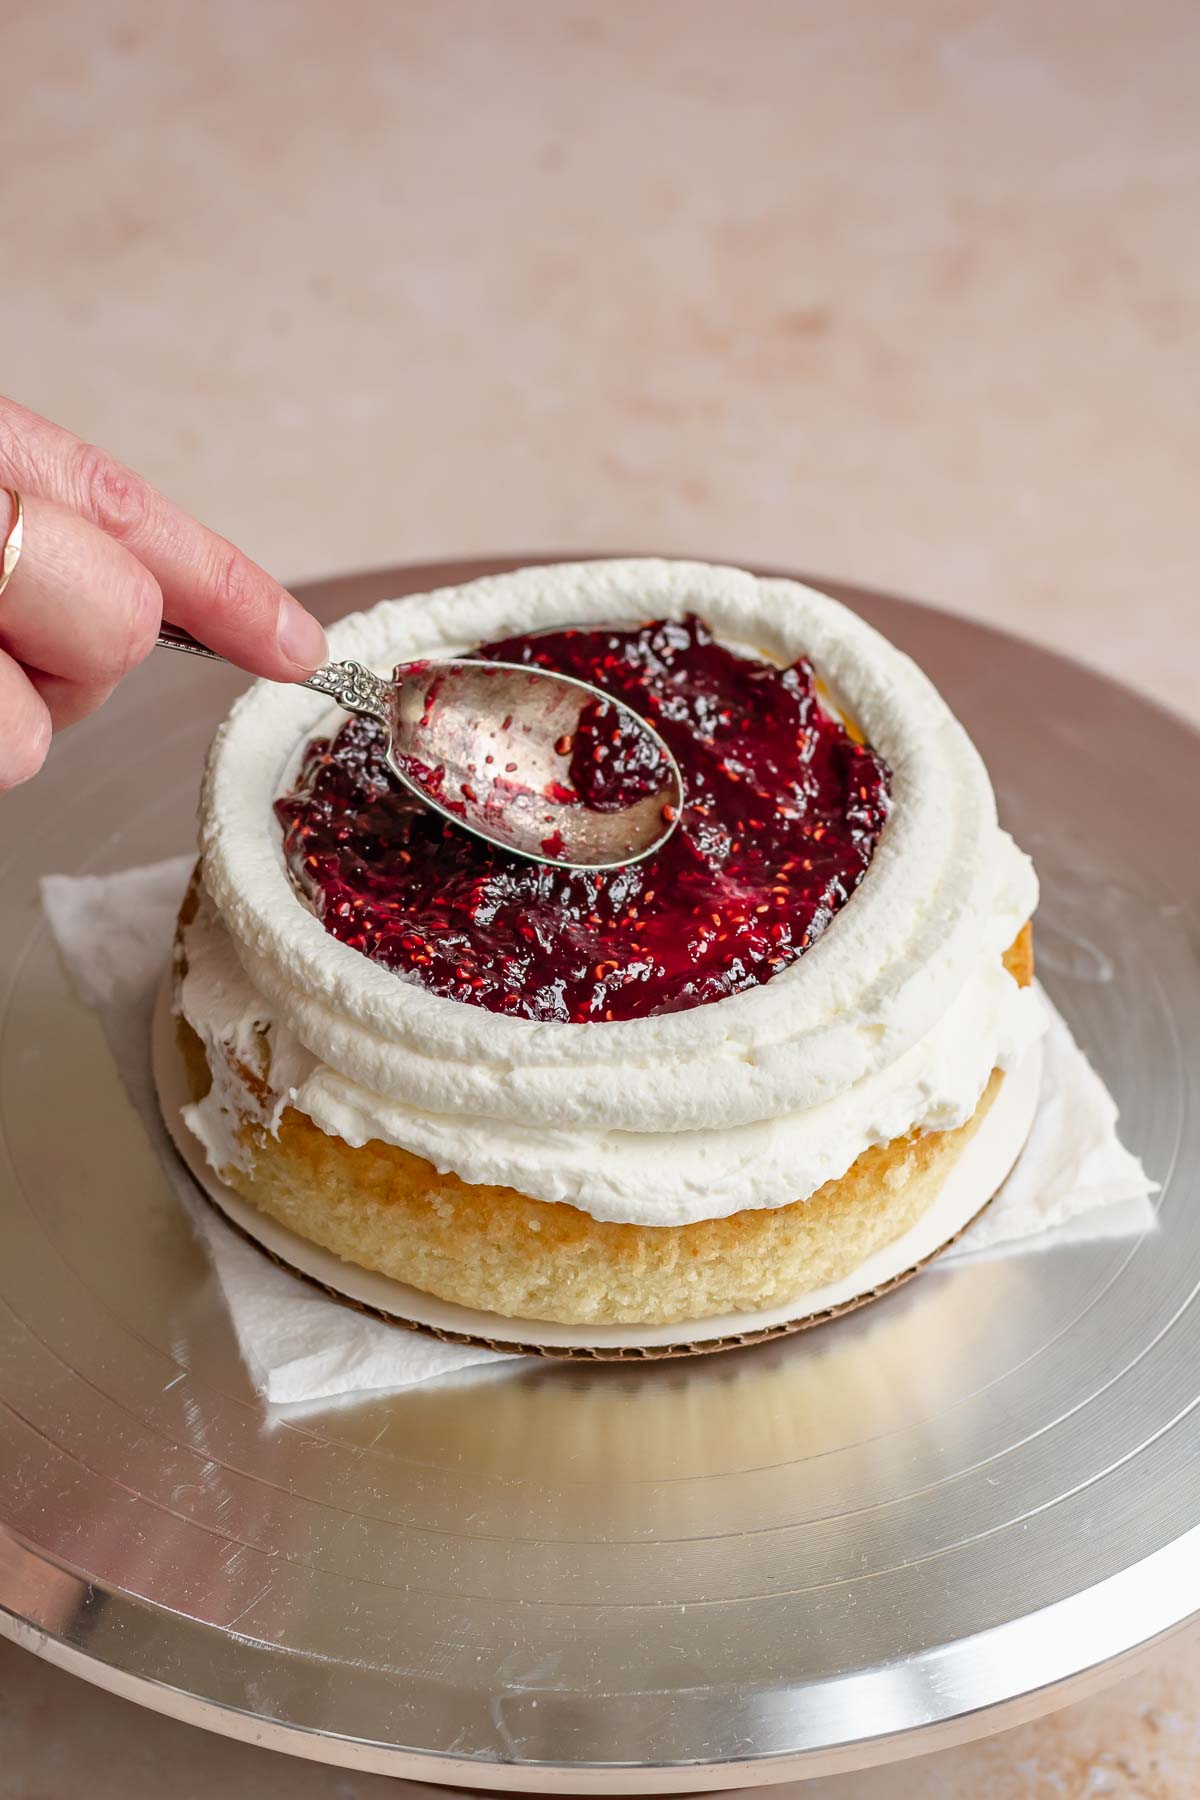 A spoon smooths raspberry jam into the center of the cake.